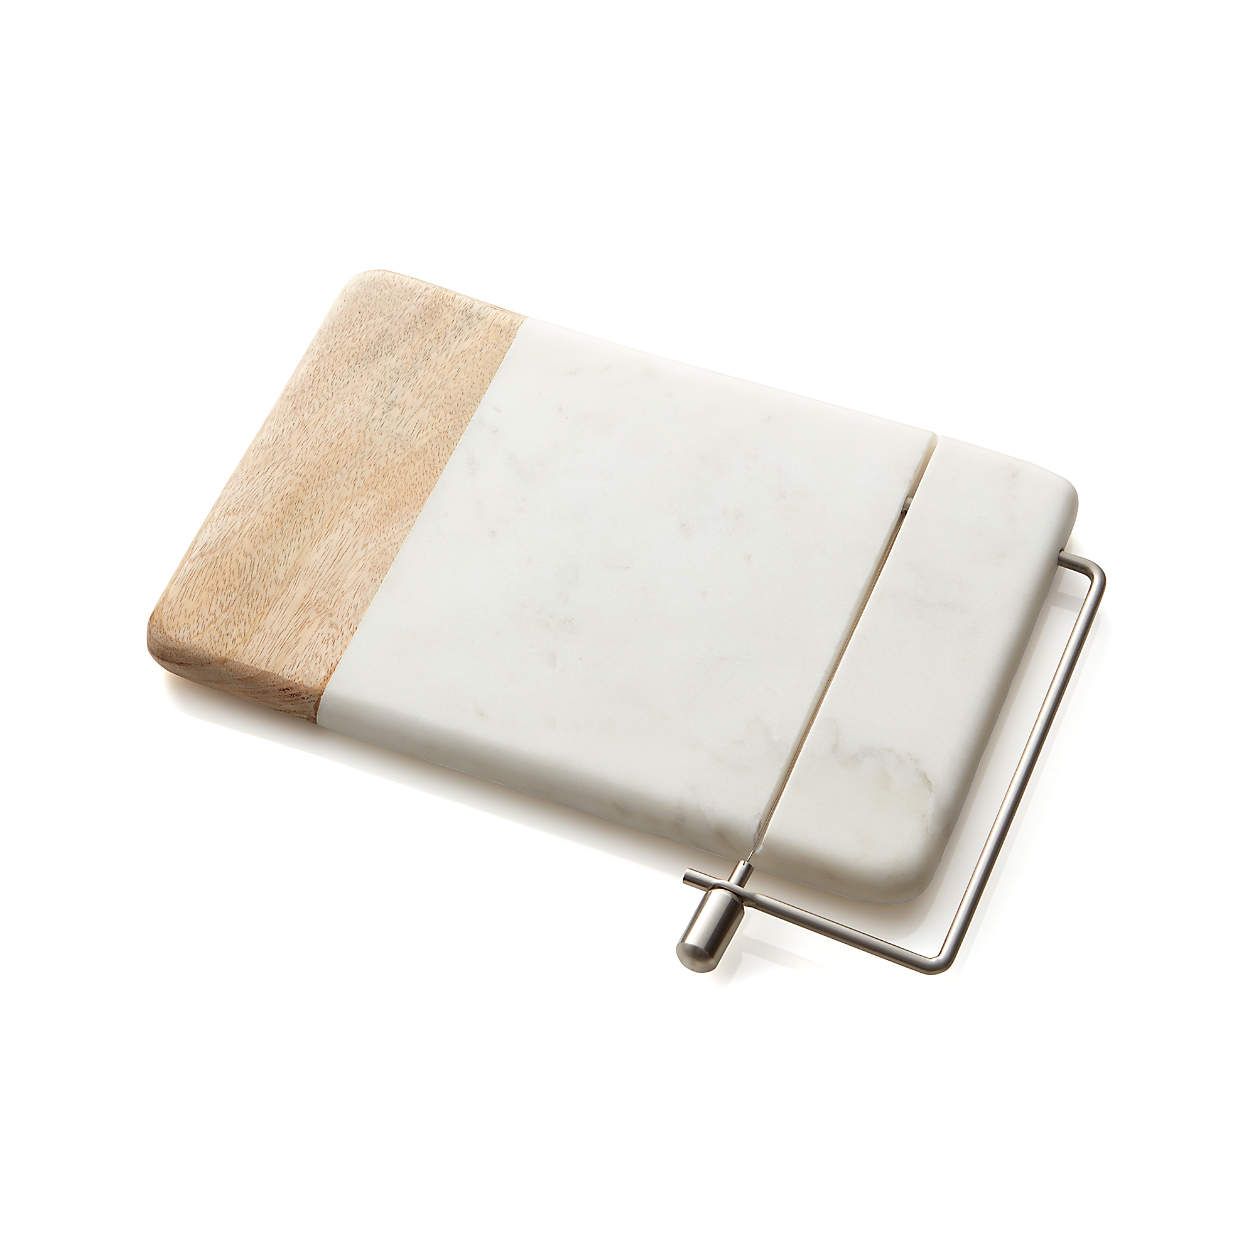 Wood Marble Cheese Slicer + Reviews | Crate and Barrel | Crate & Barrel